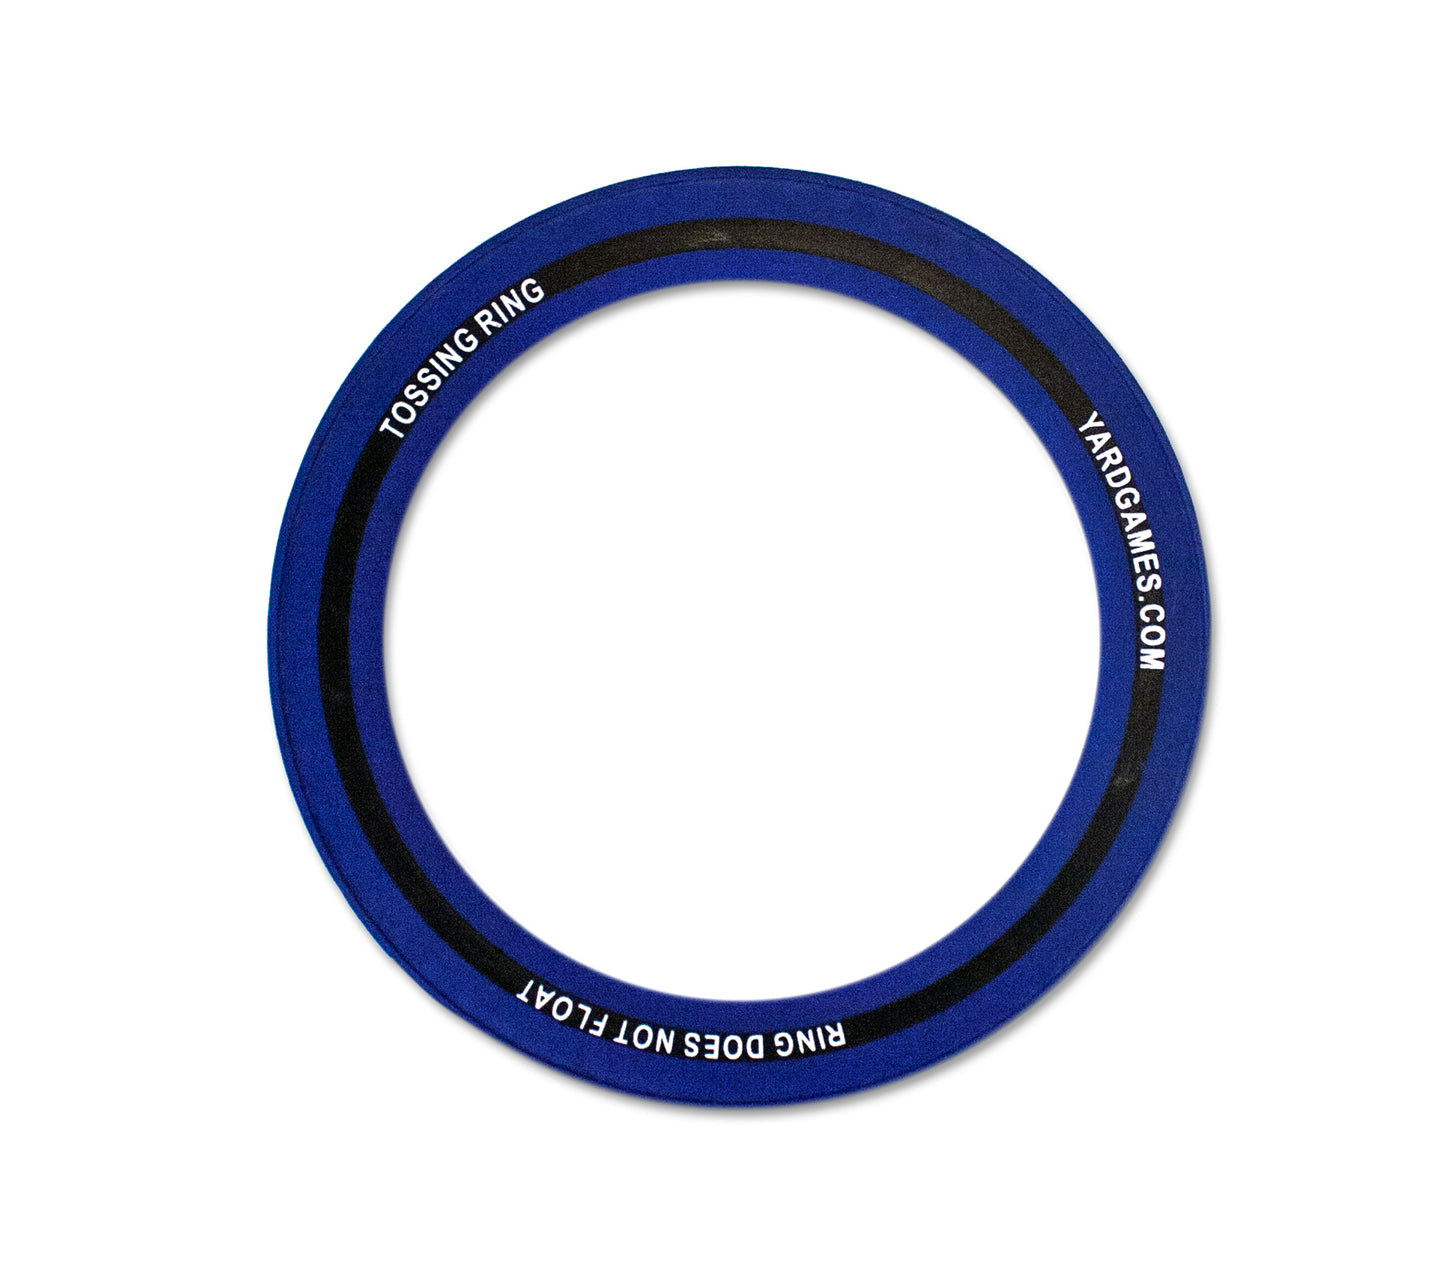 Ten Inch Soft Touch Flying Ring (3-Pack)